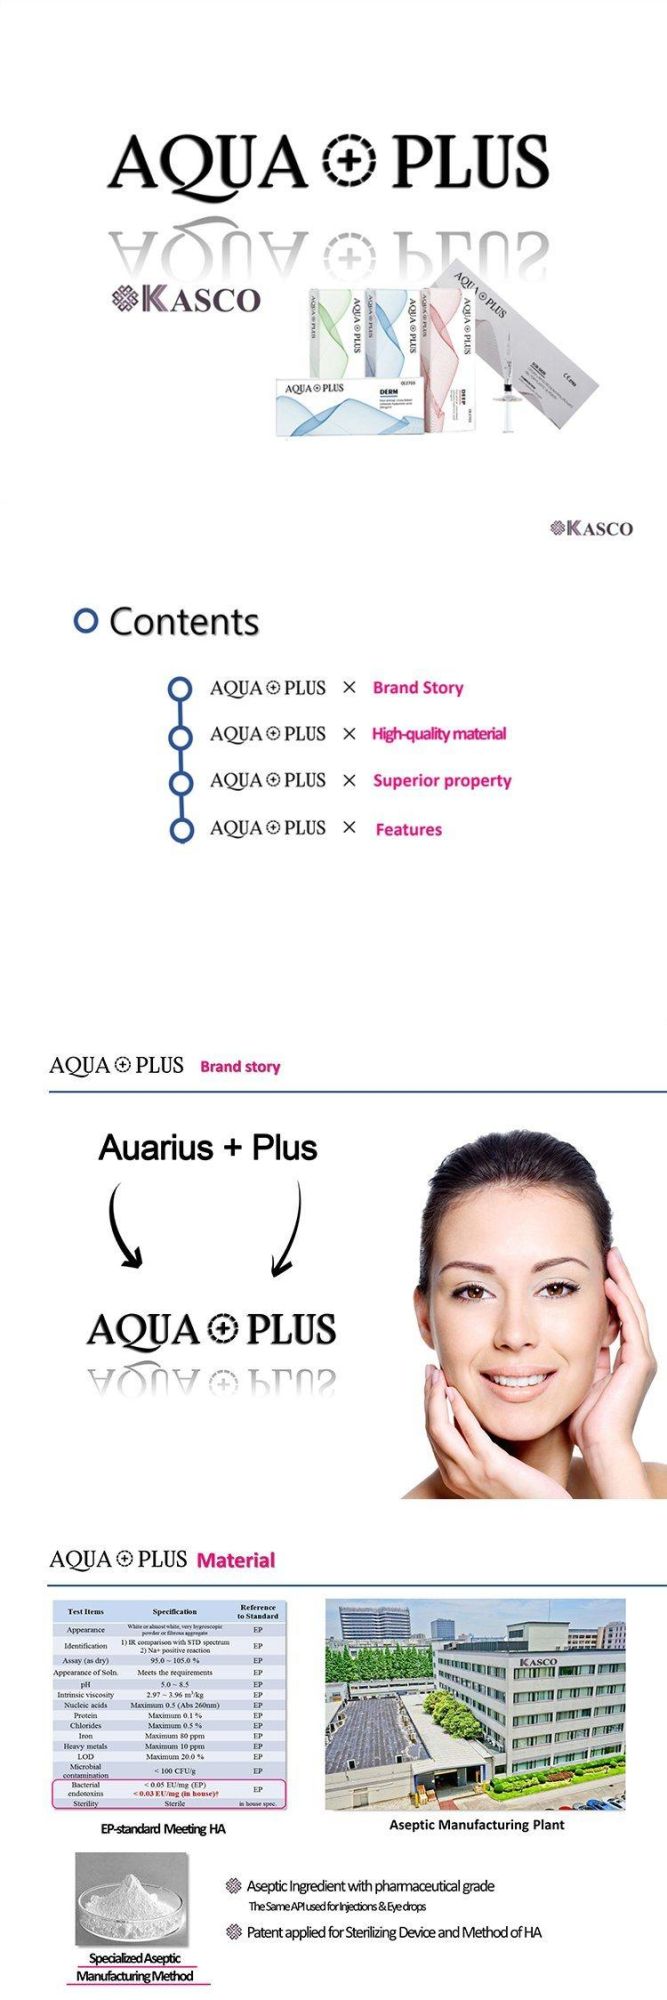 Aqua Plus Anti Aging Injection 2ml Cross Linked Hyaluronic Acid Injectable Dermal Fillers